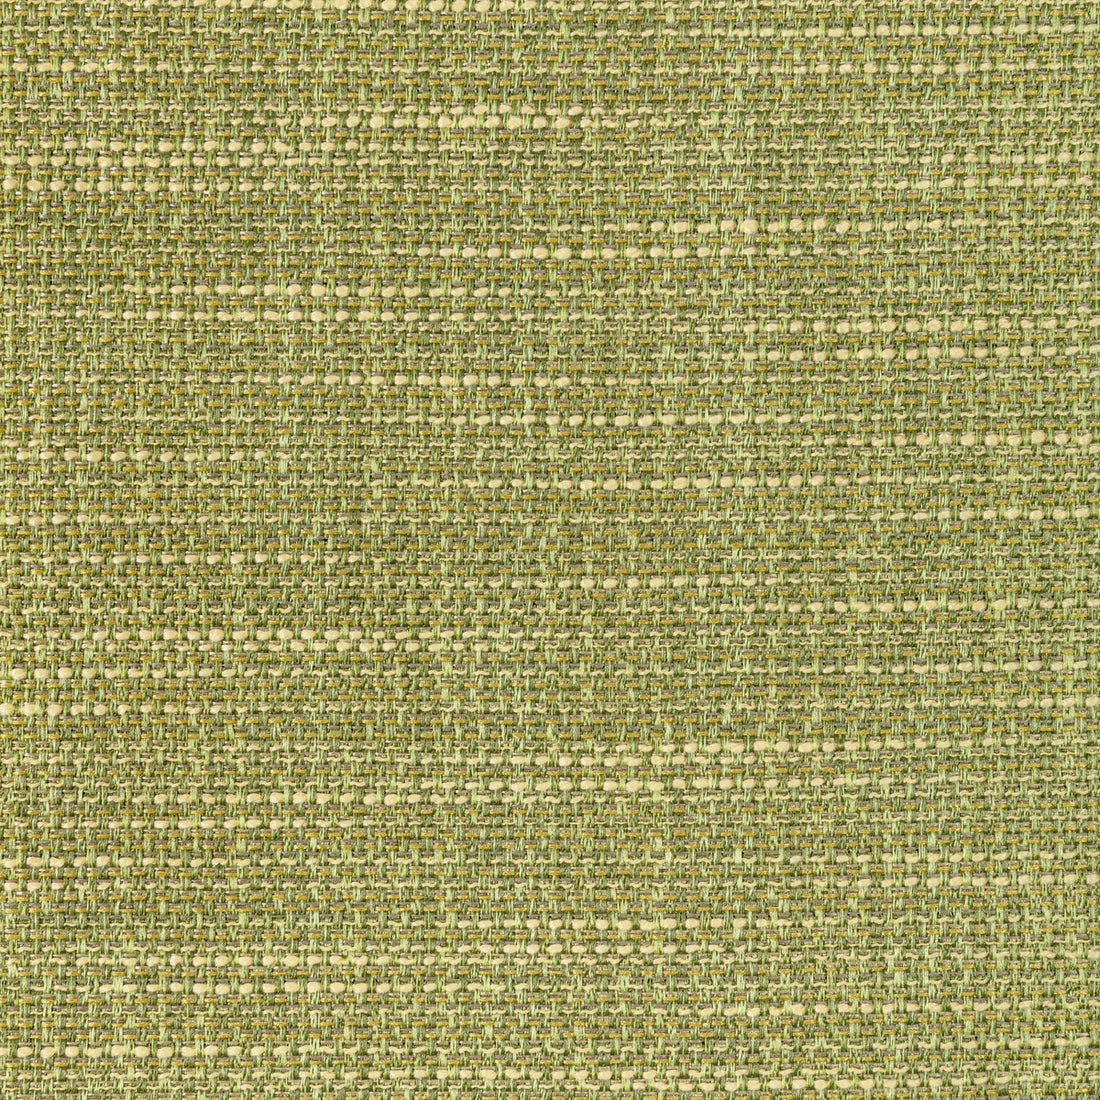 Luma Texture fabric in cactus color - pattern 4947.314.0 - by Kravet Contract in the Fr Window Luma Texture collection